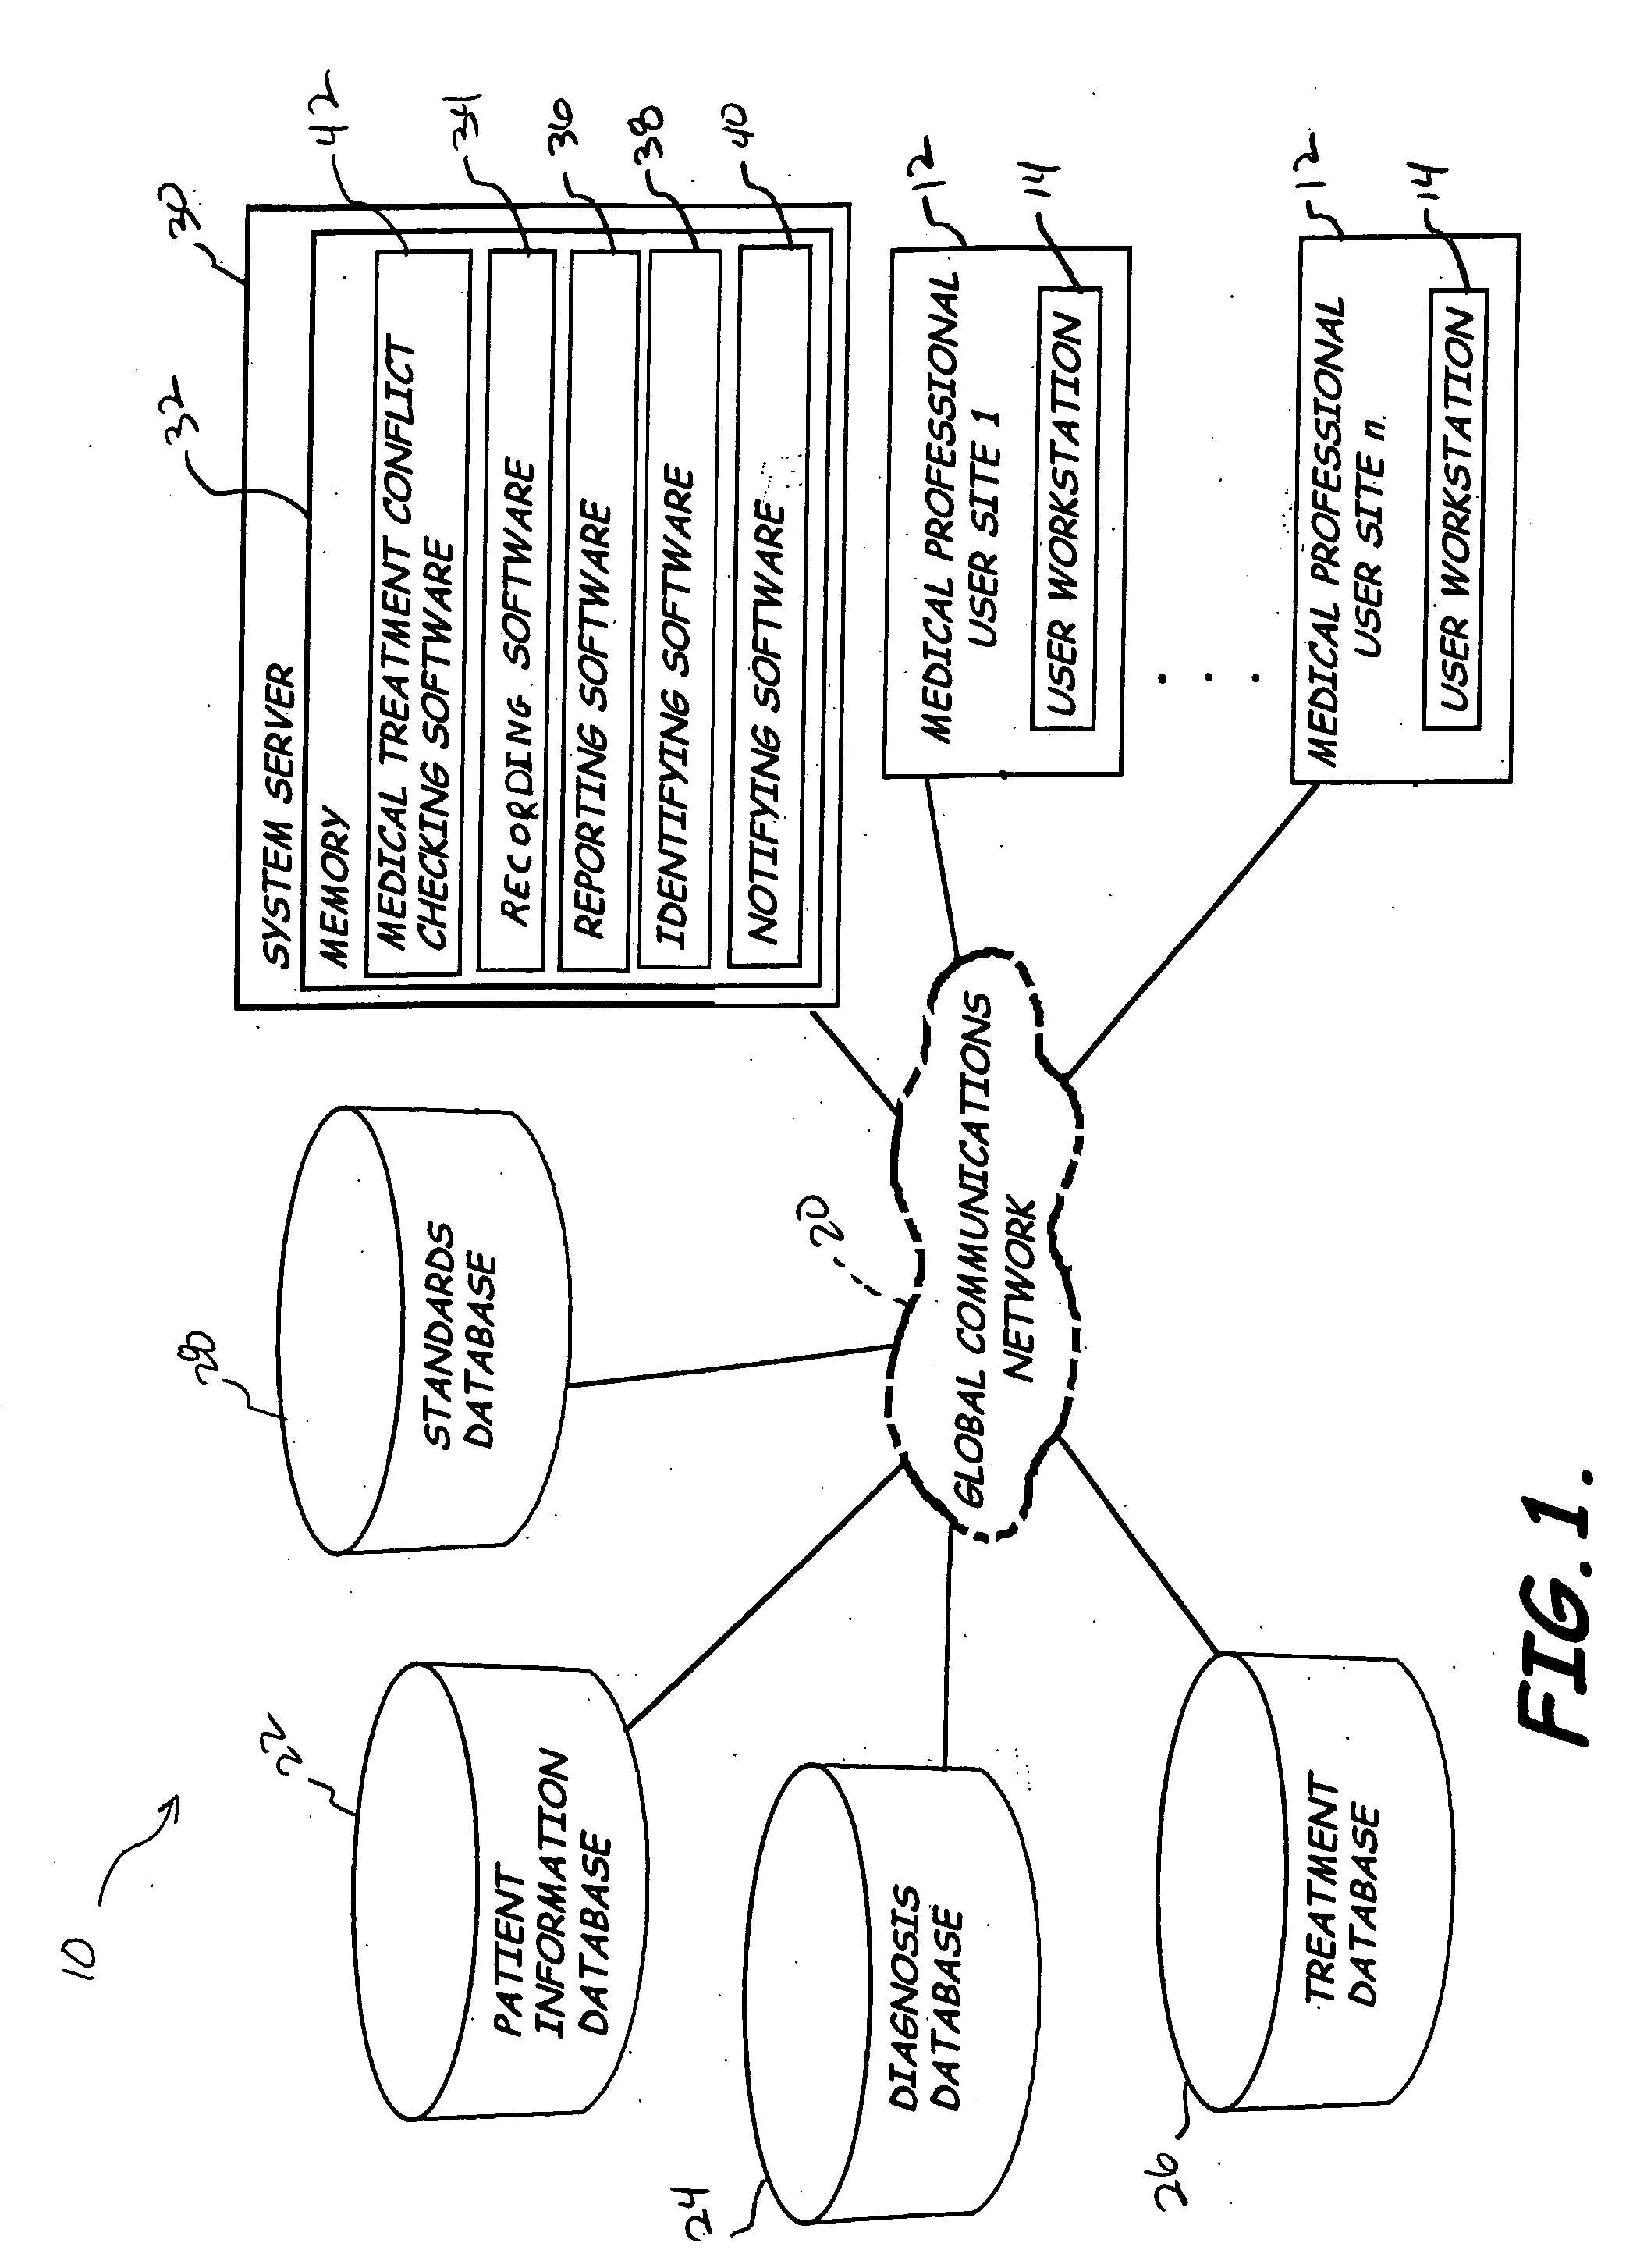 Medical professional monitoring system and associated methods